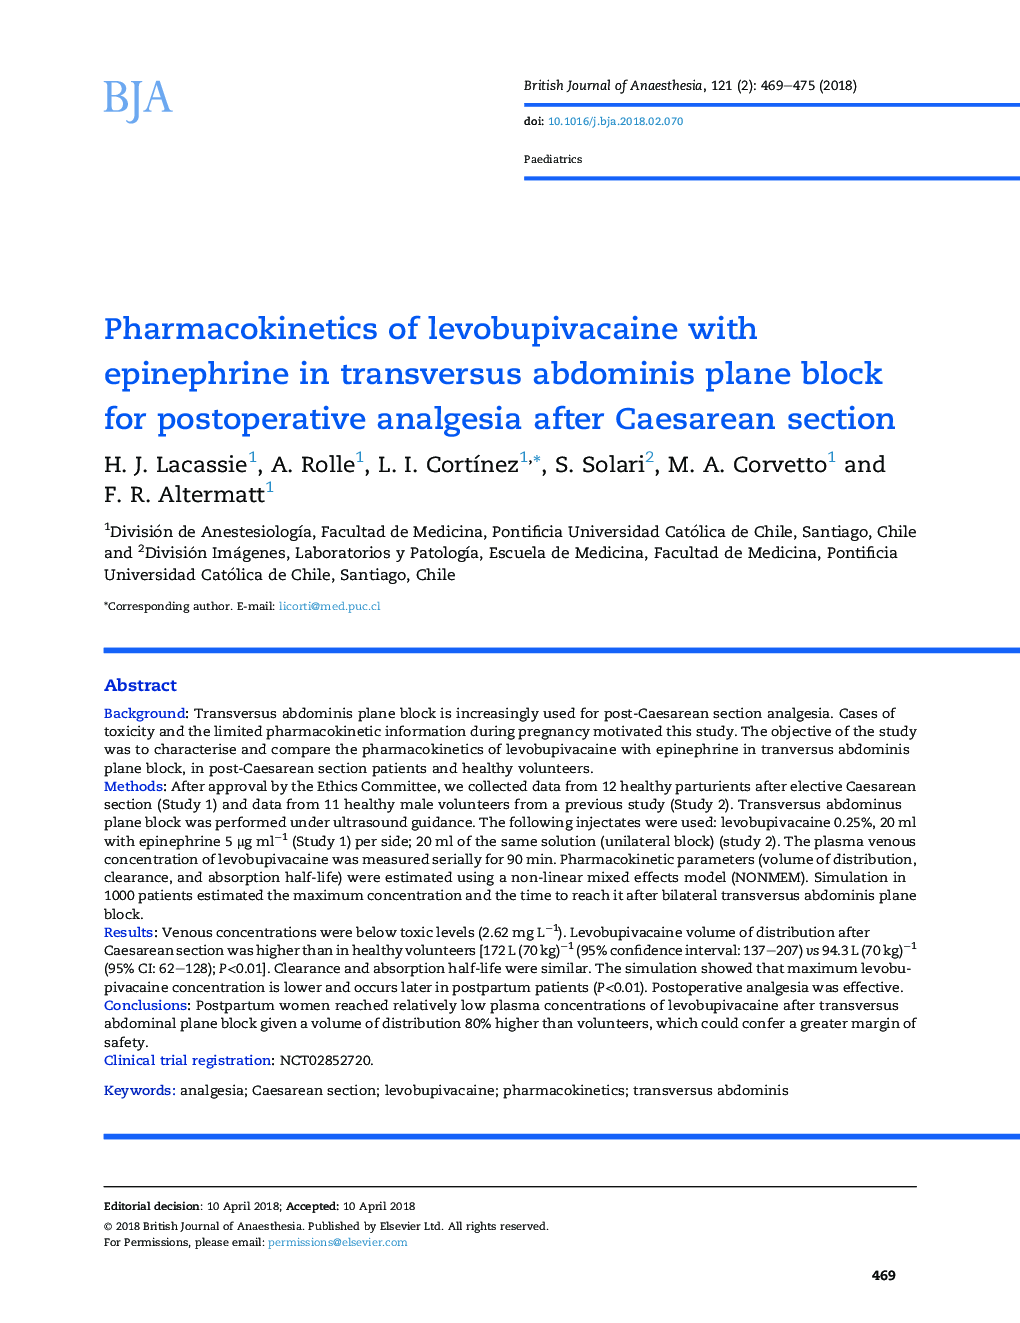 Pharmacokinetics of levobupivacaine with epinephrine in transversus abdominis plane block for postoperative analgesia after Caesarean section